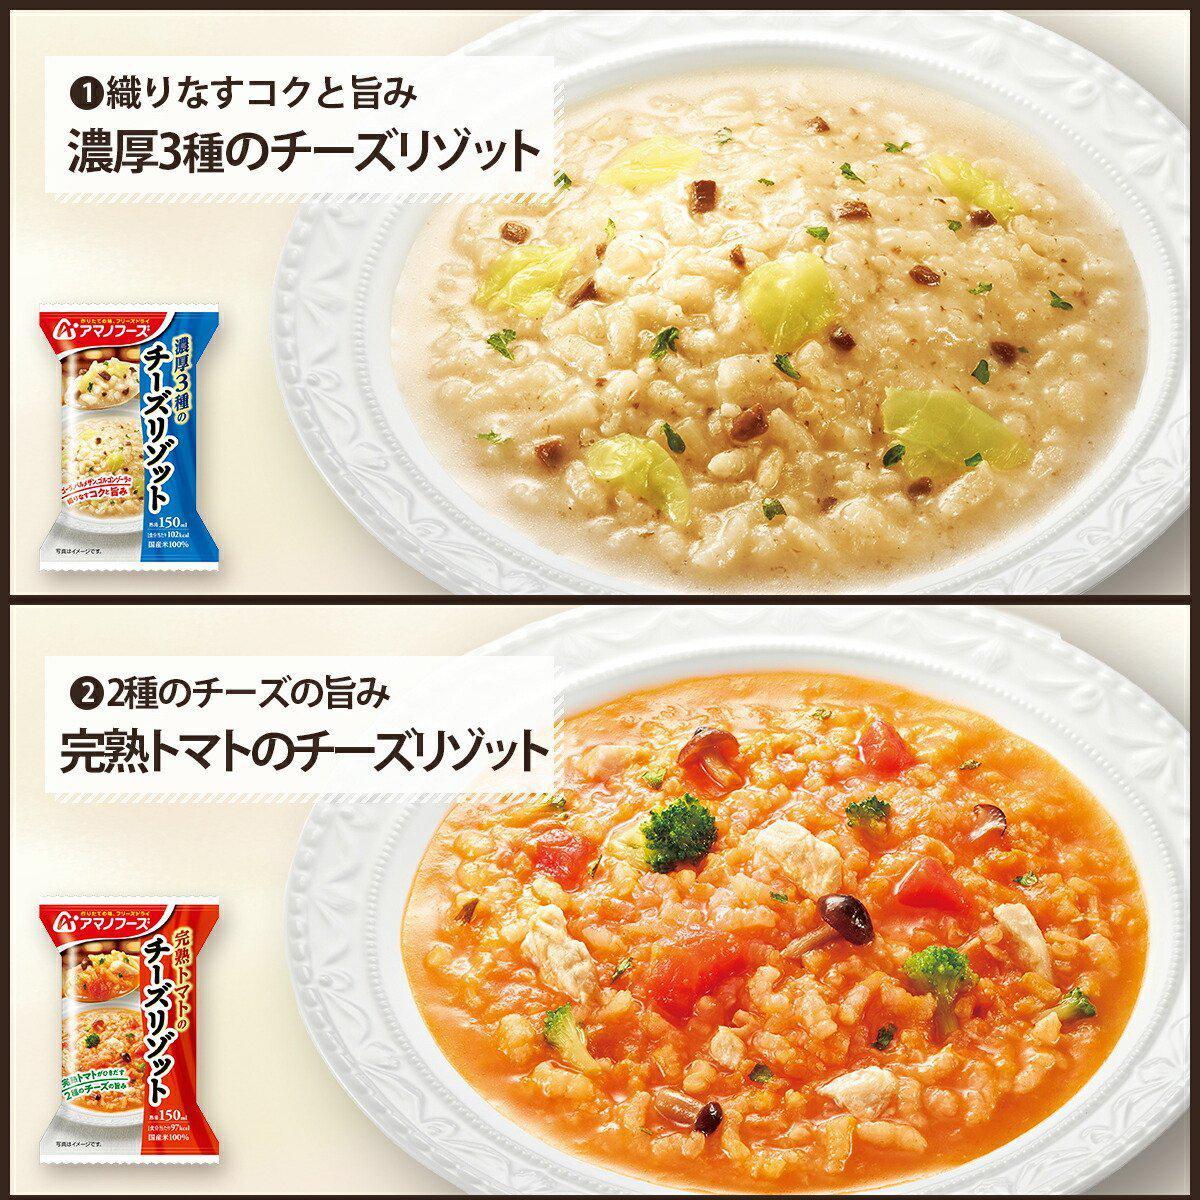 Amano Foods Cheese Risotto Freeze-Dried Rice Dish 4 Servings - YOYO JAPAN